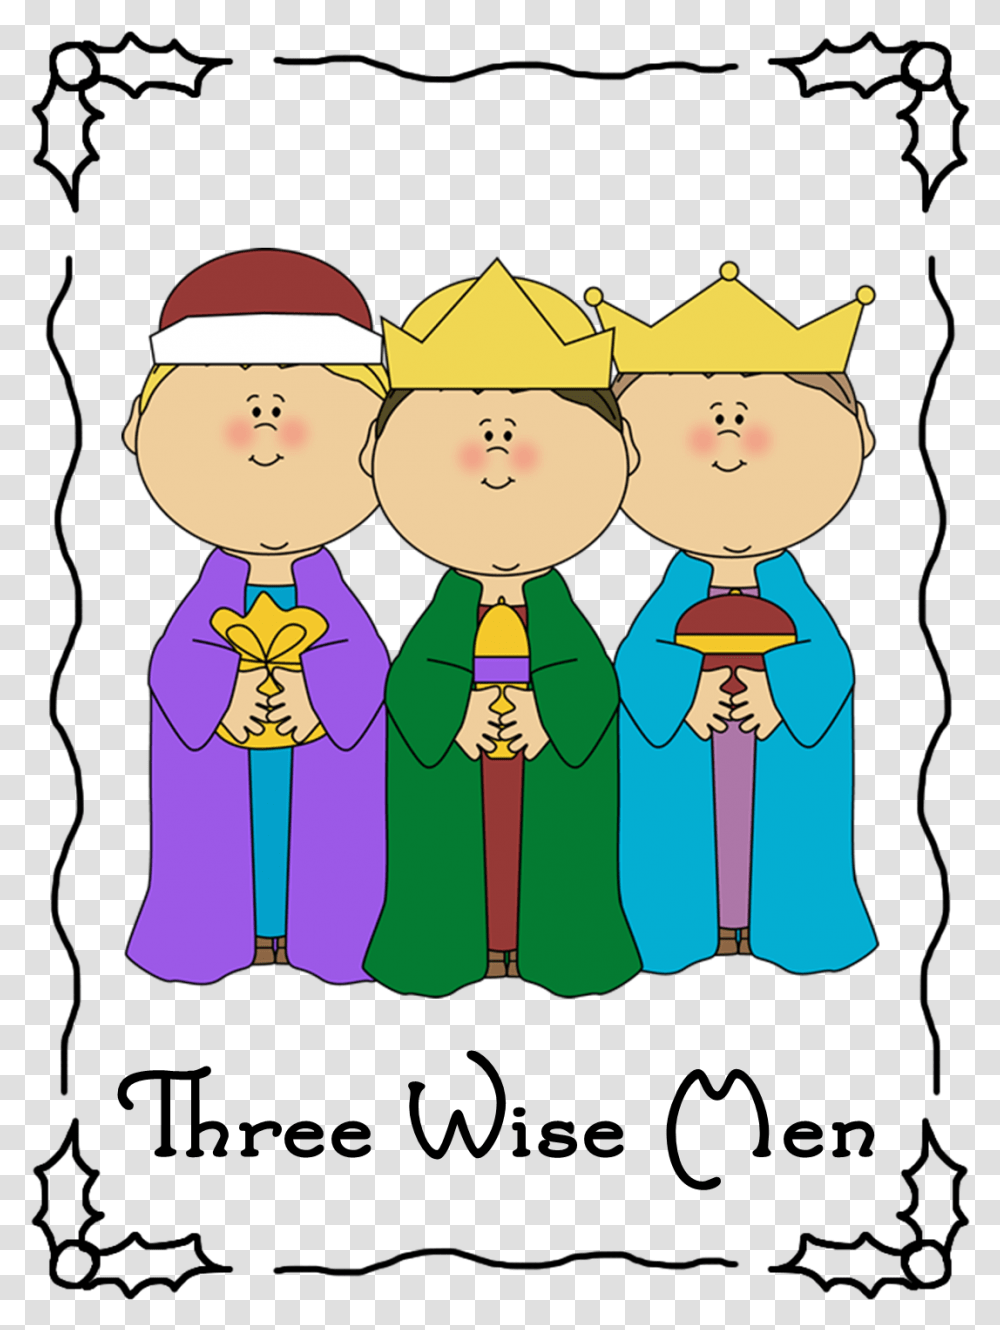 They Are The Three Wise Men Christmas Carol Story Map, Hat, Apparel Transparent Png